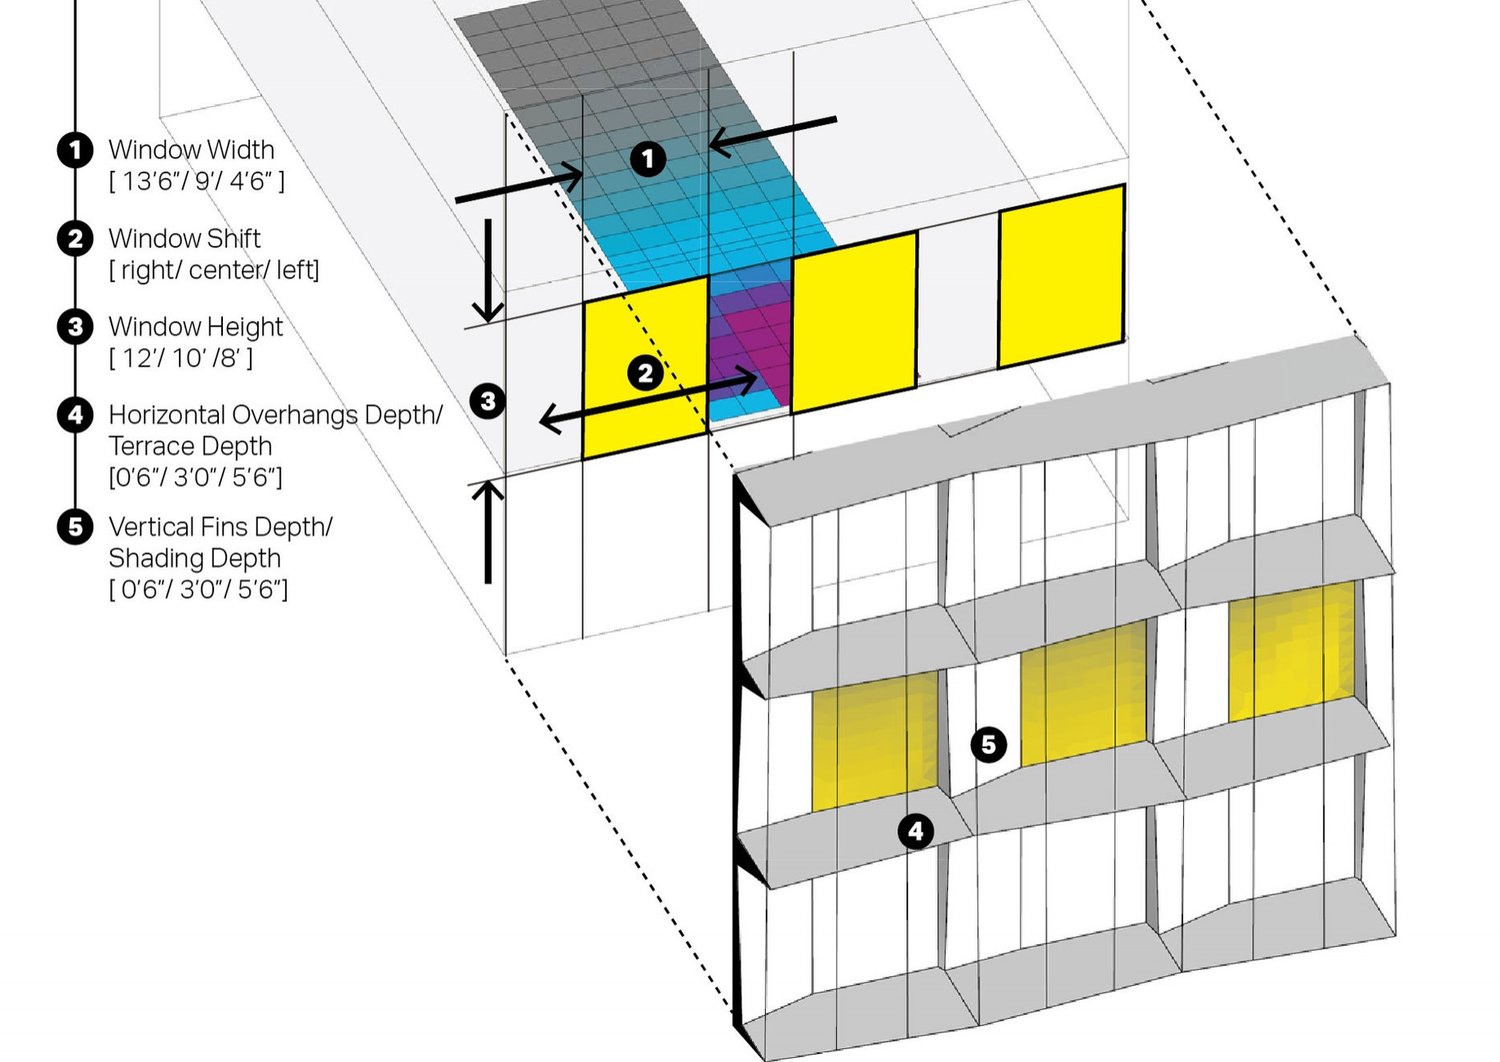  What is the impact of facade geometry on space daylight distribution and heating/ cooling load? Check out the full submission HERE Submitted by: Xiaofei Shen Firm Name: AECOM 